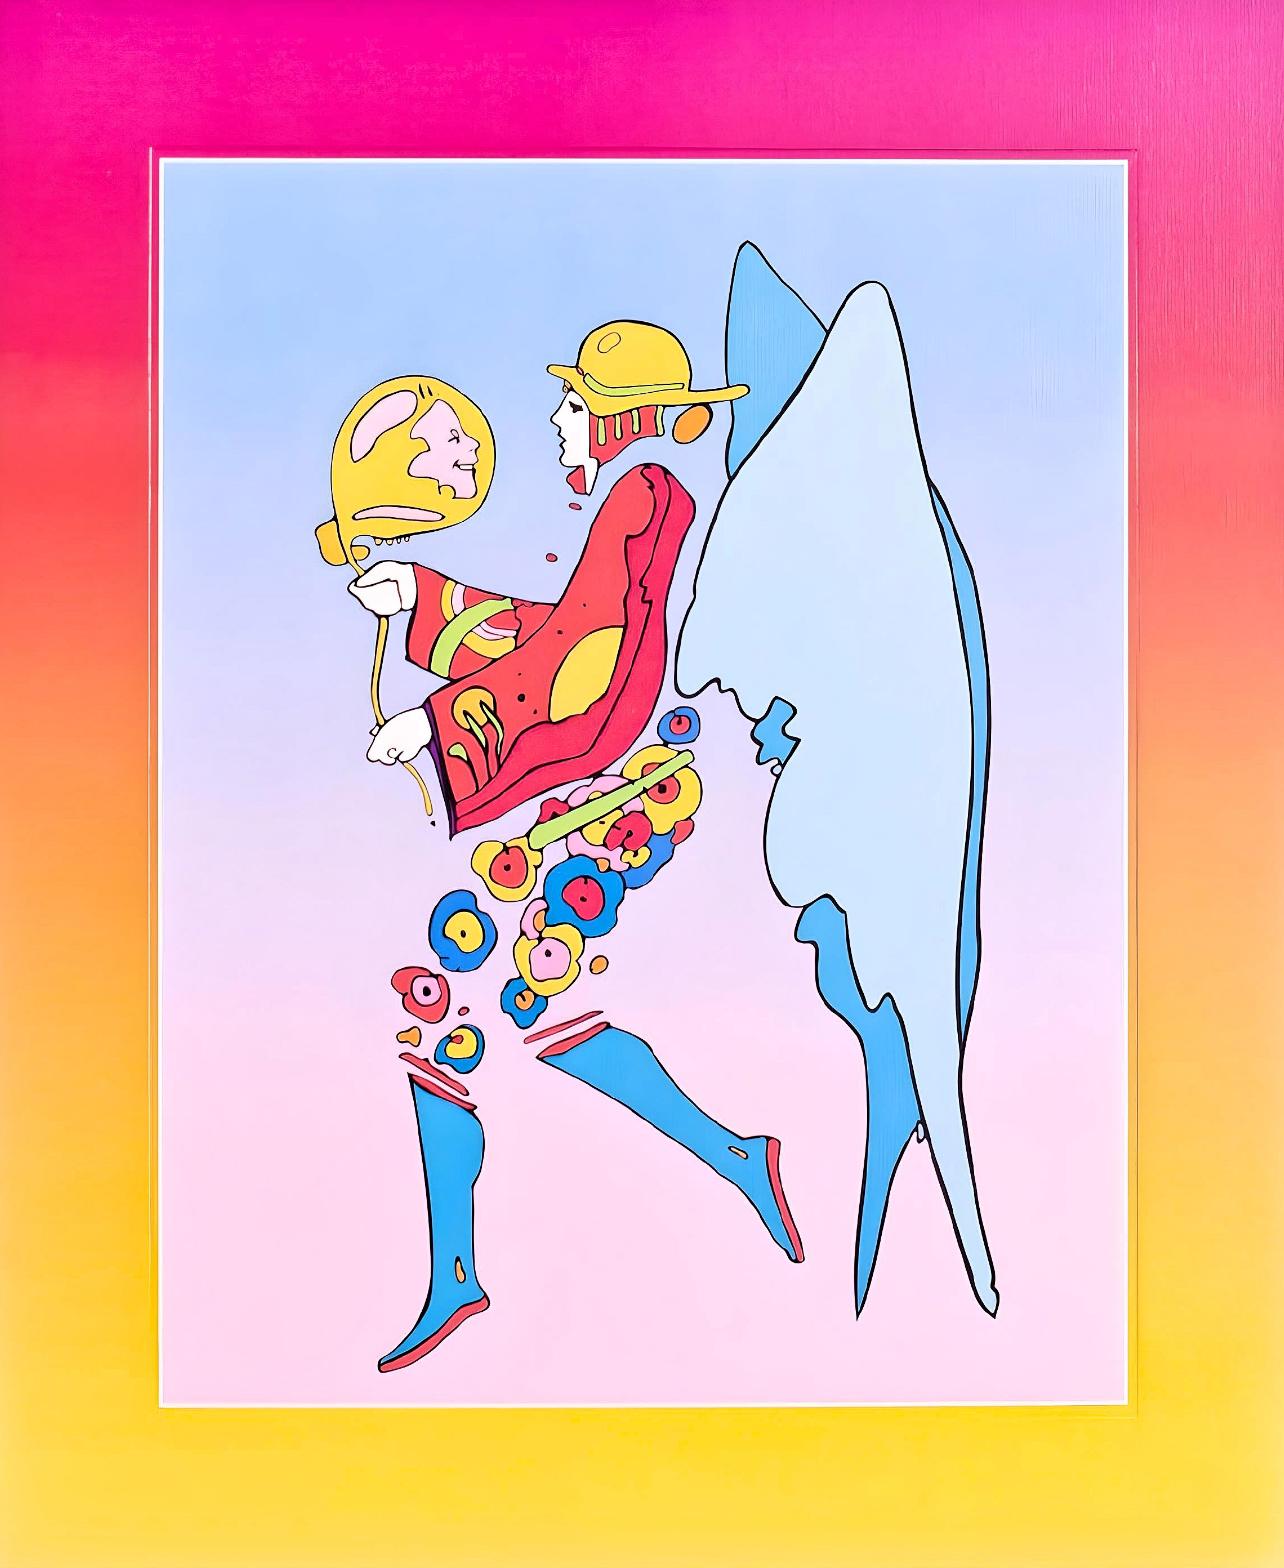 Artist: Peter Max (1937)
Title: Tip Toe Floating on Blends II
Year: 2005
Edition: 453/500, plus proofs
Medium: Lithograph on Lustro Saxony paper
Size: 17 x 13 inches
Condition: Excellent
Inscription: Signed and numbered by the artist.
Notes: